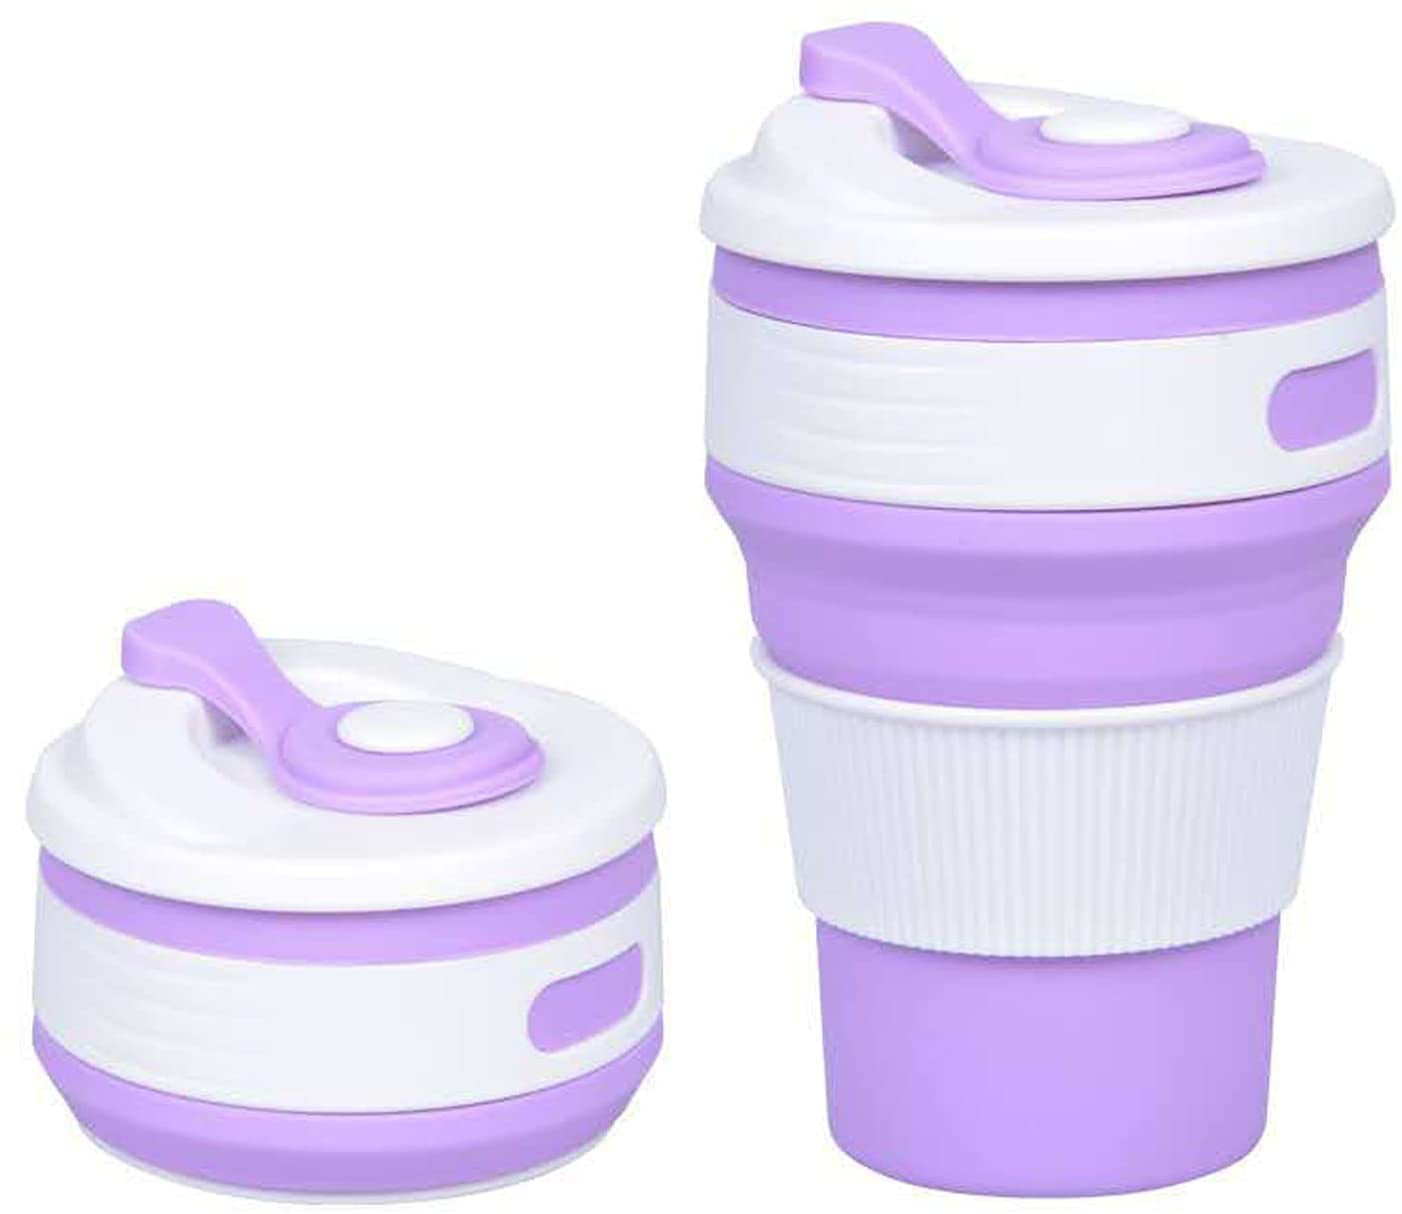 200 ML Collapsible Cup 4 Pcs Portable Folding Travel Cup Silicone Drinking Mug with Lid Coffee Cup for Outdoor 